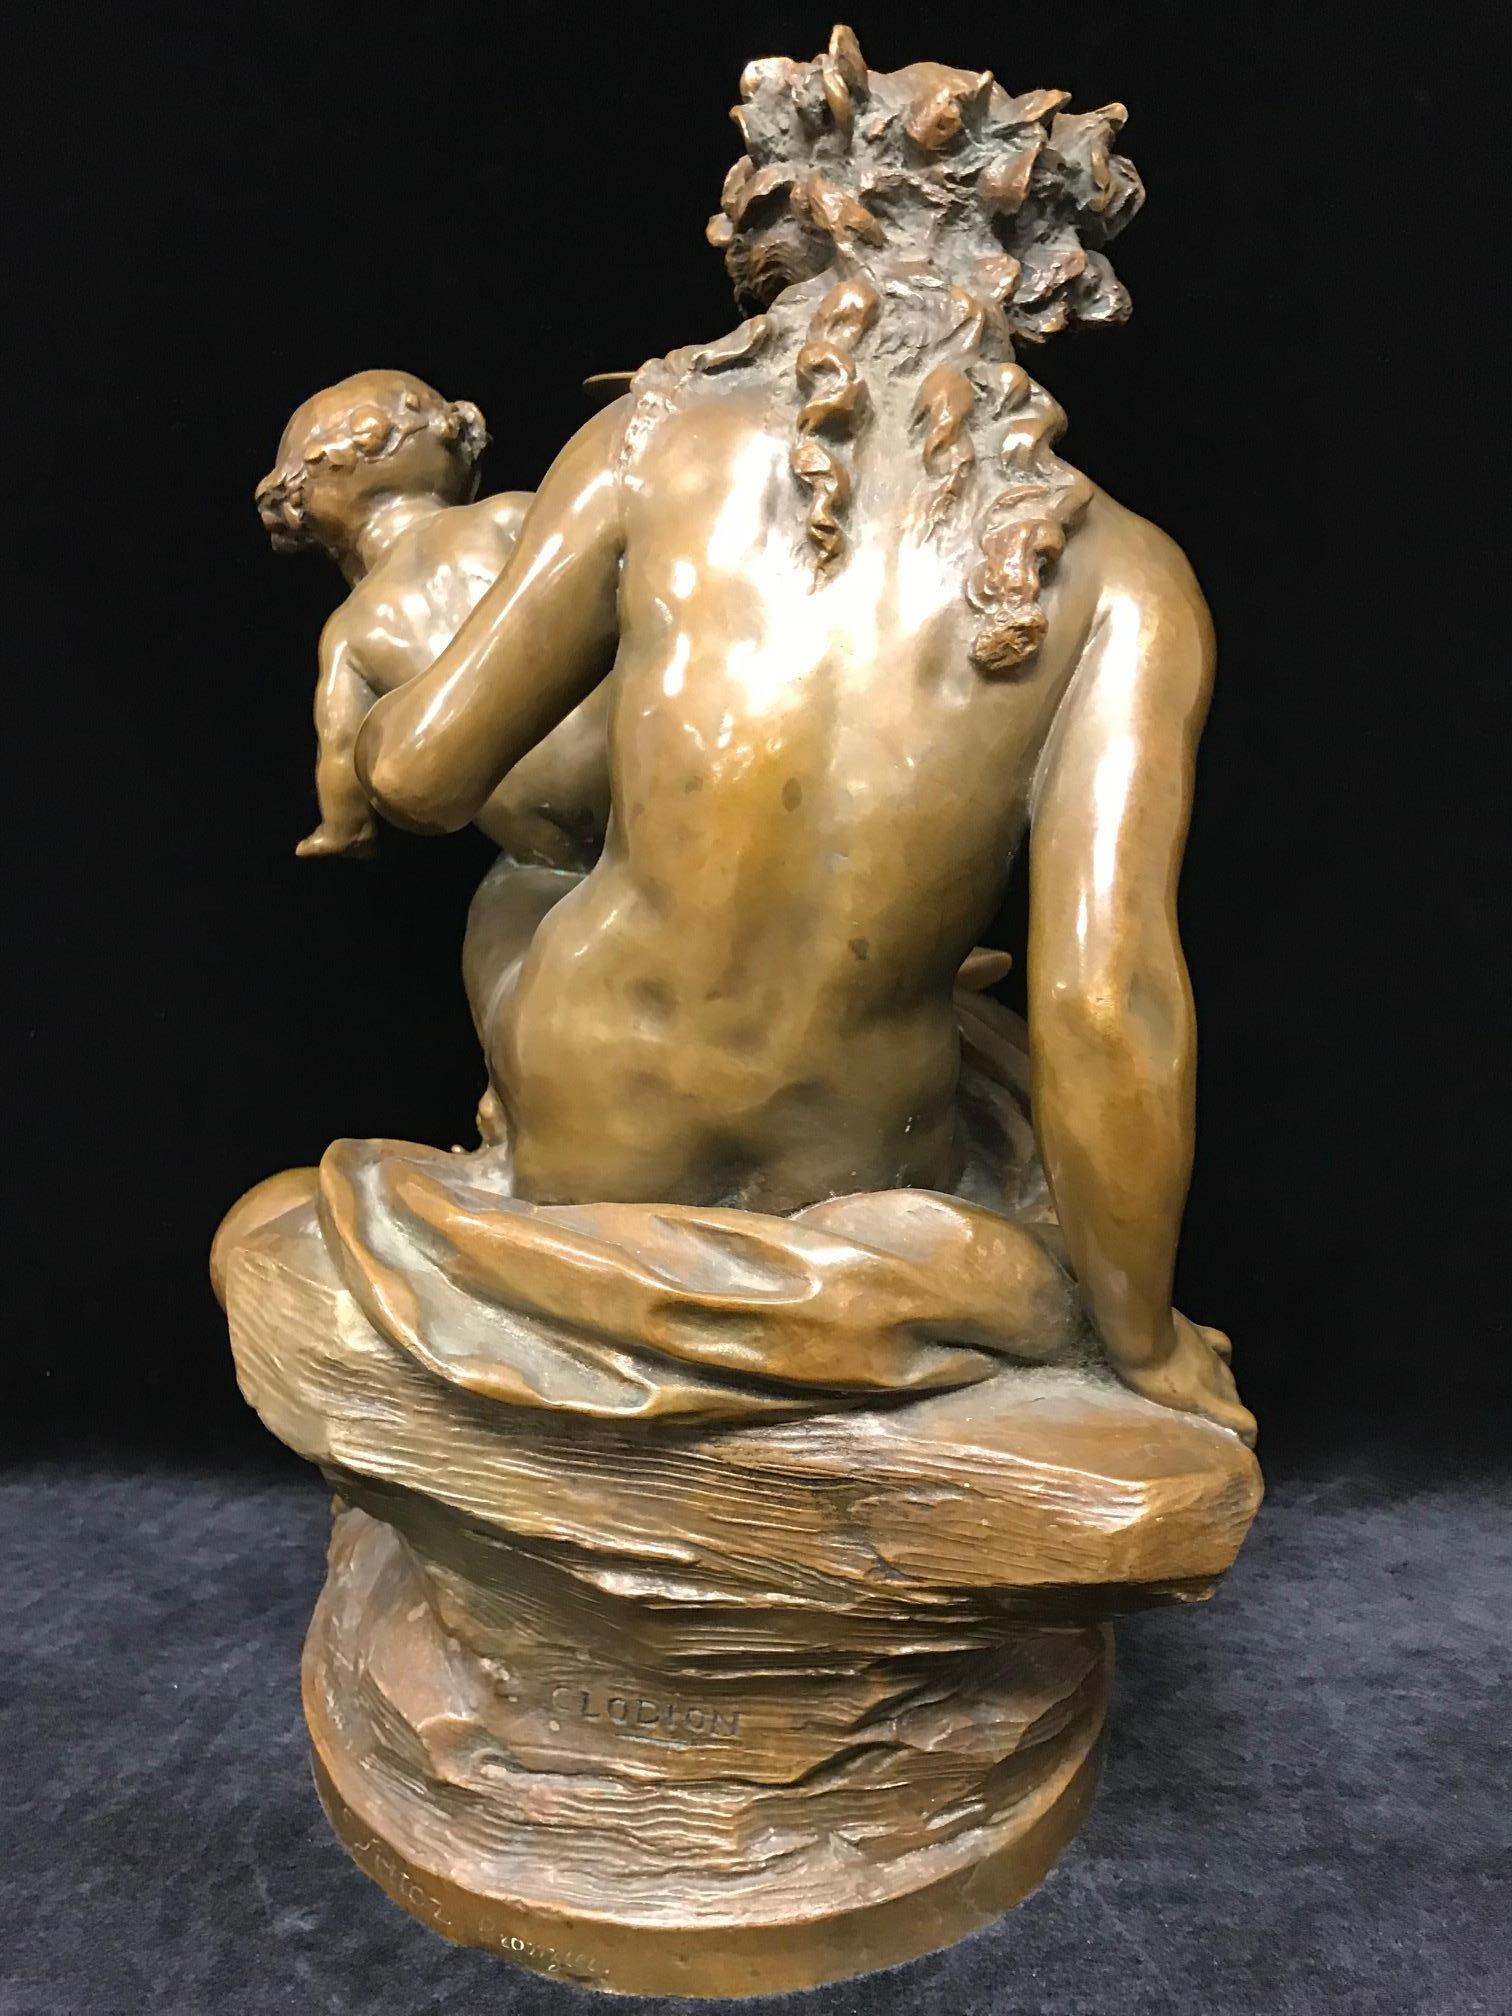 Nude faun woman sitting on a rock and 2 puttis, after Clodion  - Gold Figurative Sculpture by Claude Michel Clodion